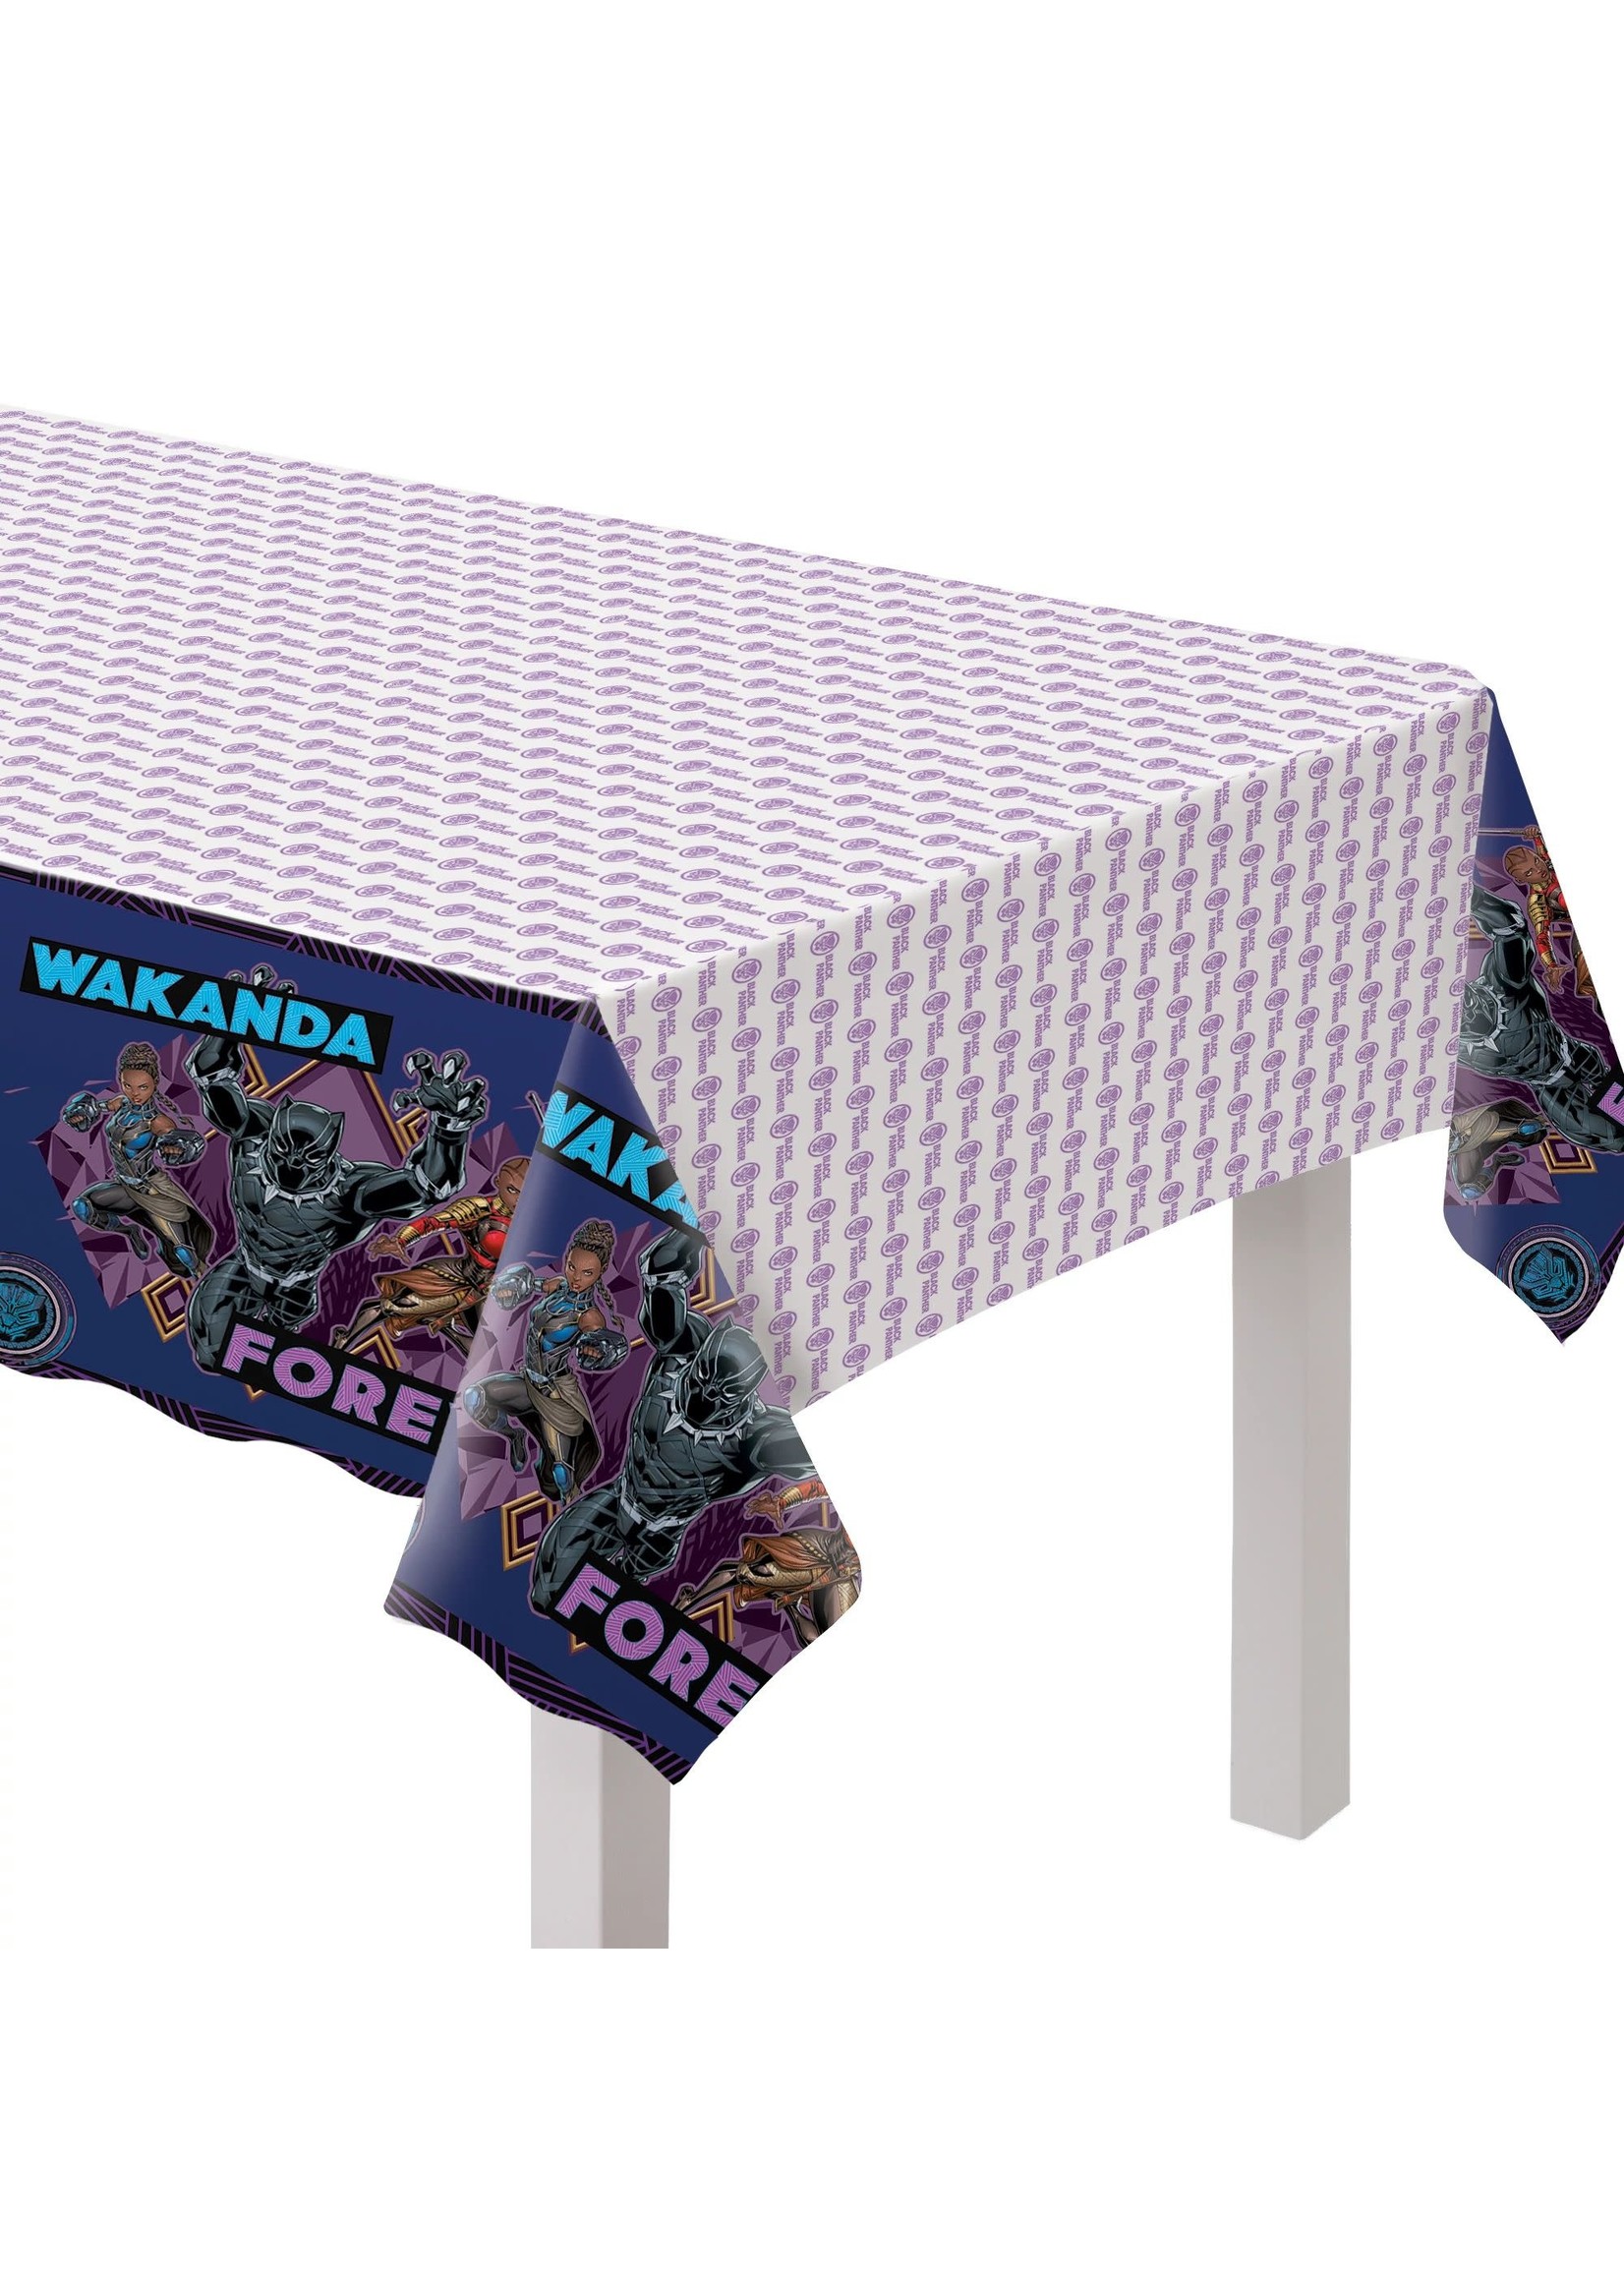 AMSCAN Black Panther Wakanda Forever Table Cover